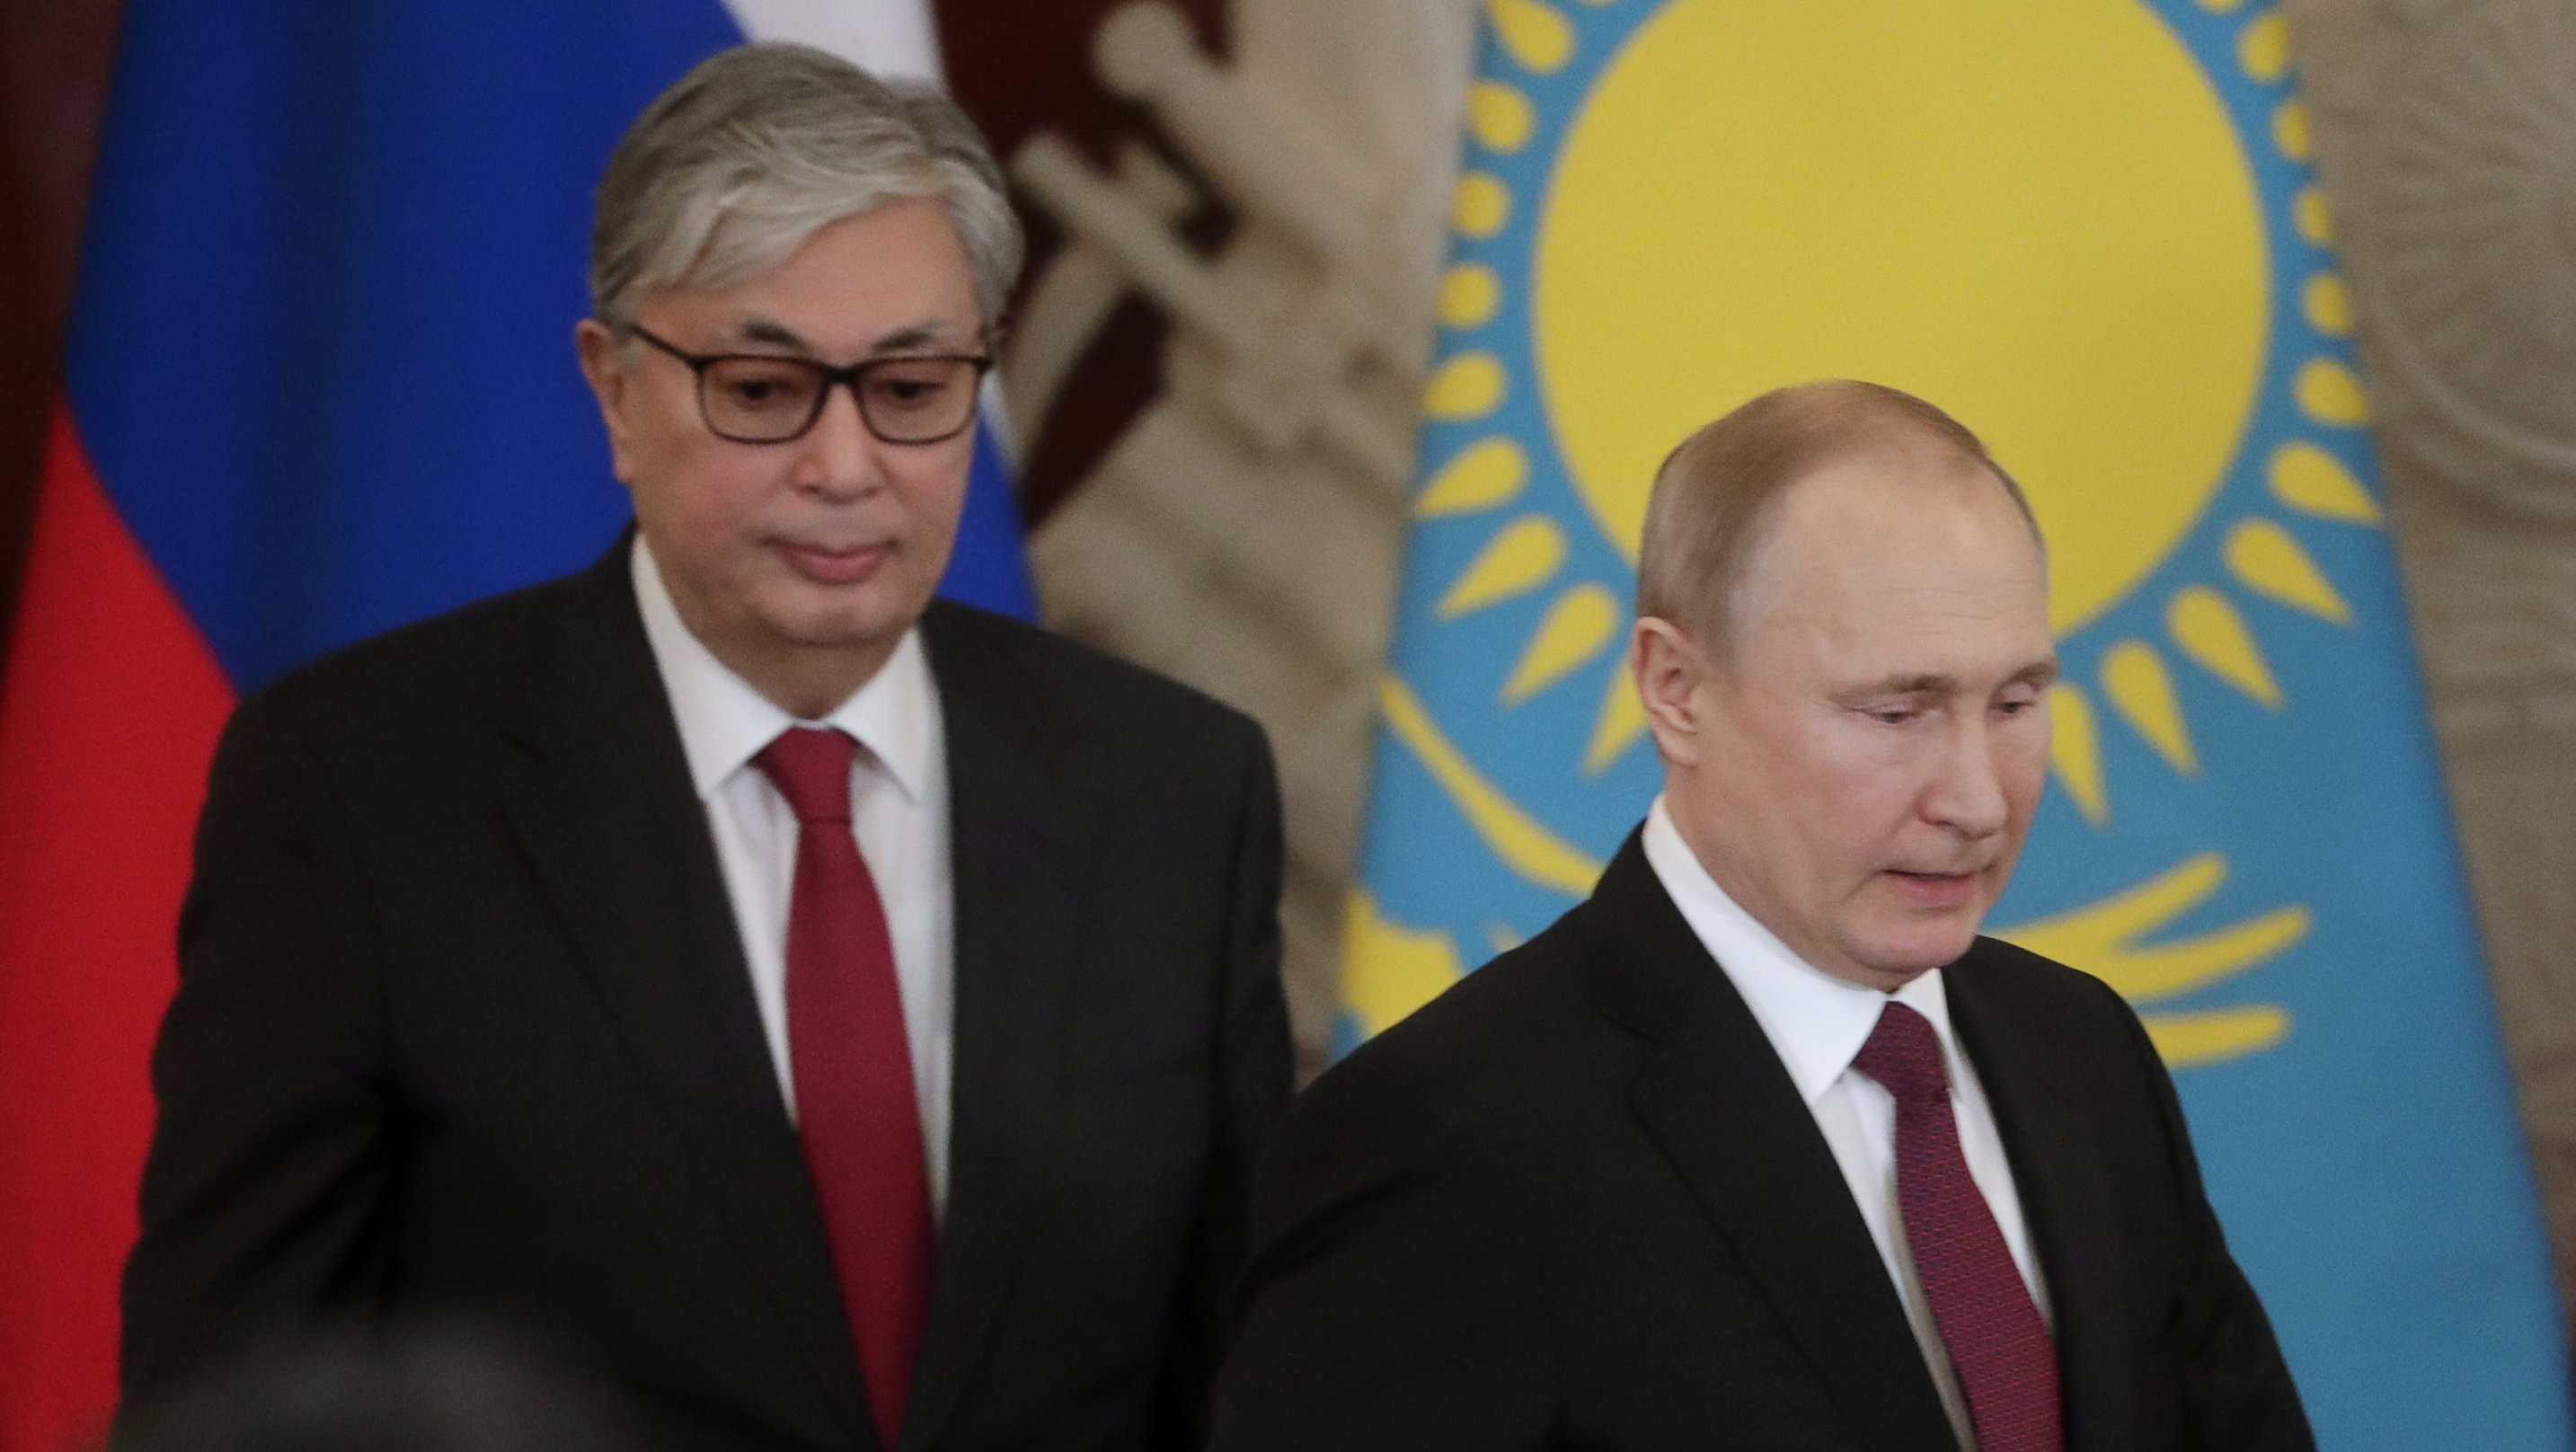 Presidents of Russia and Kazakhstan meet in Moscow